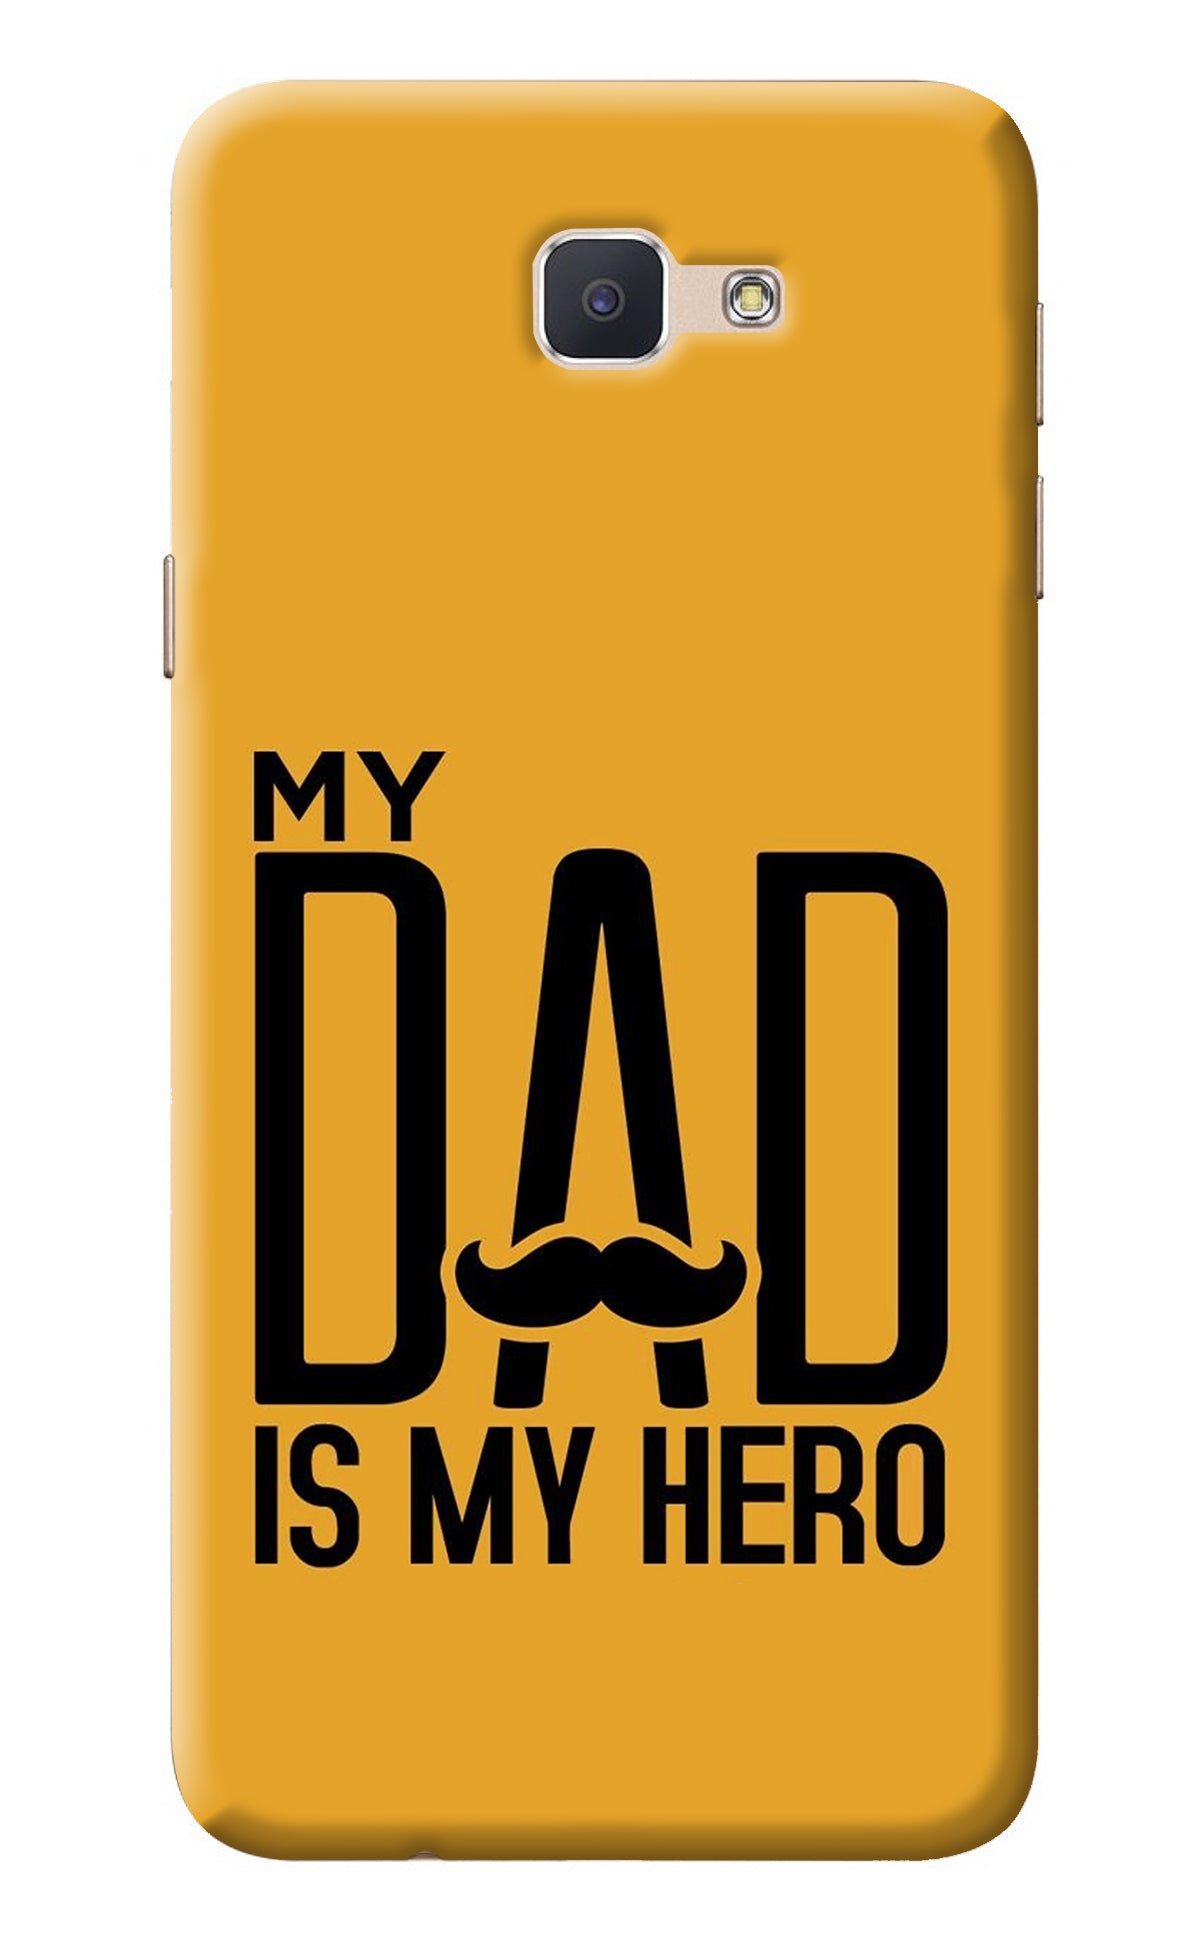 My Dad Is My Hero Samsung J7 Prime Back Cover